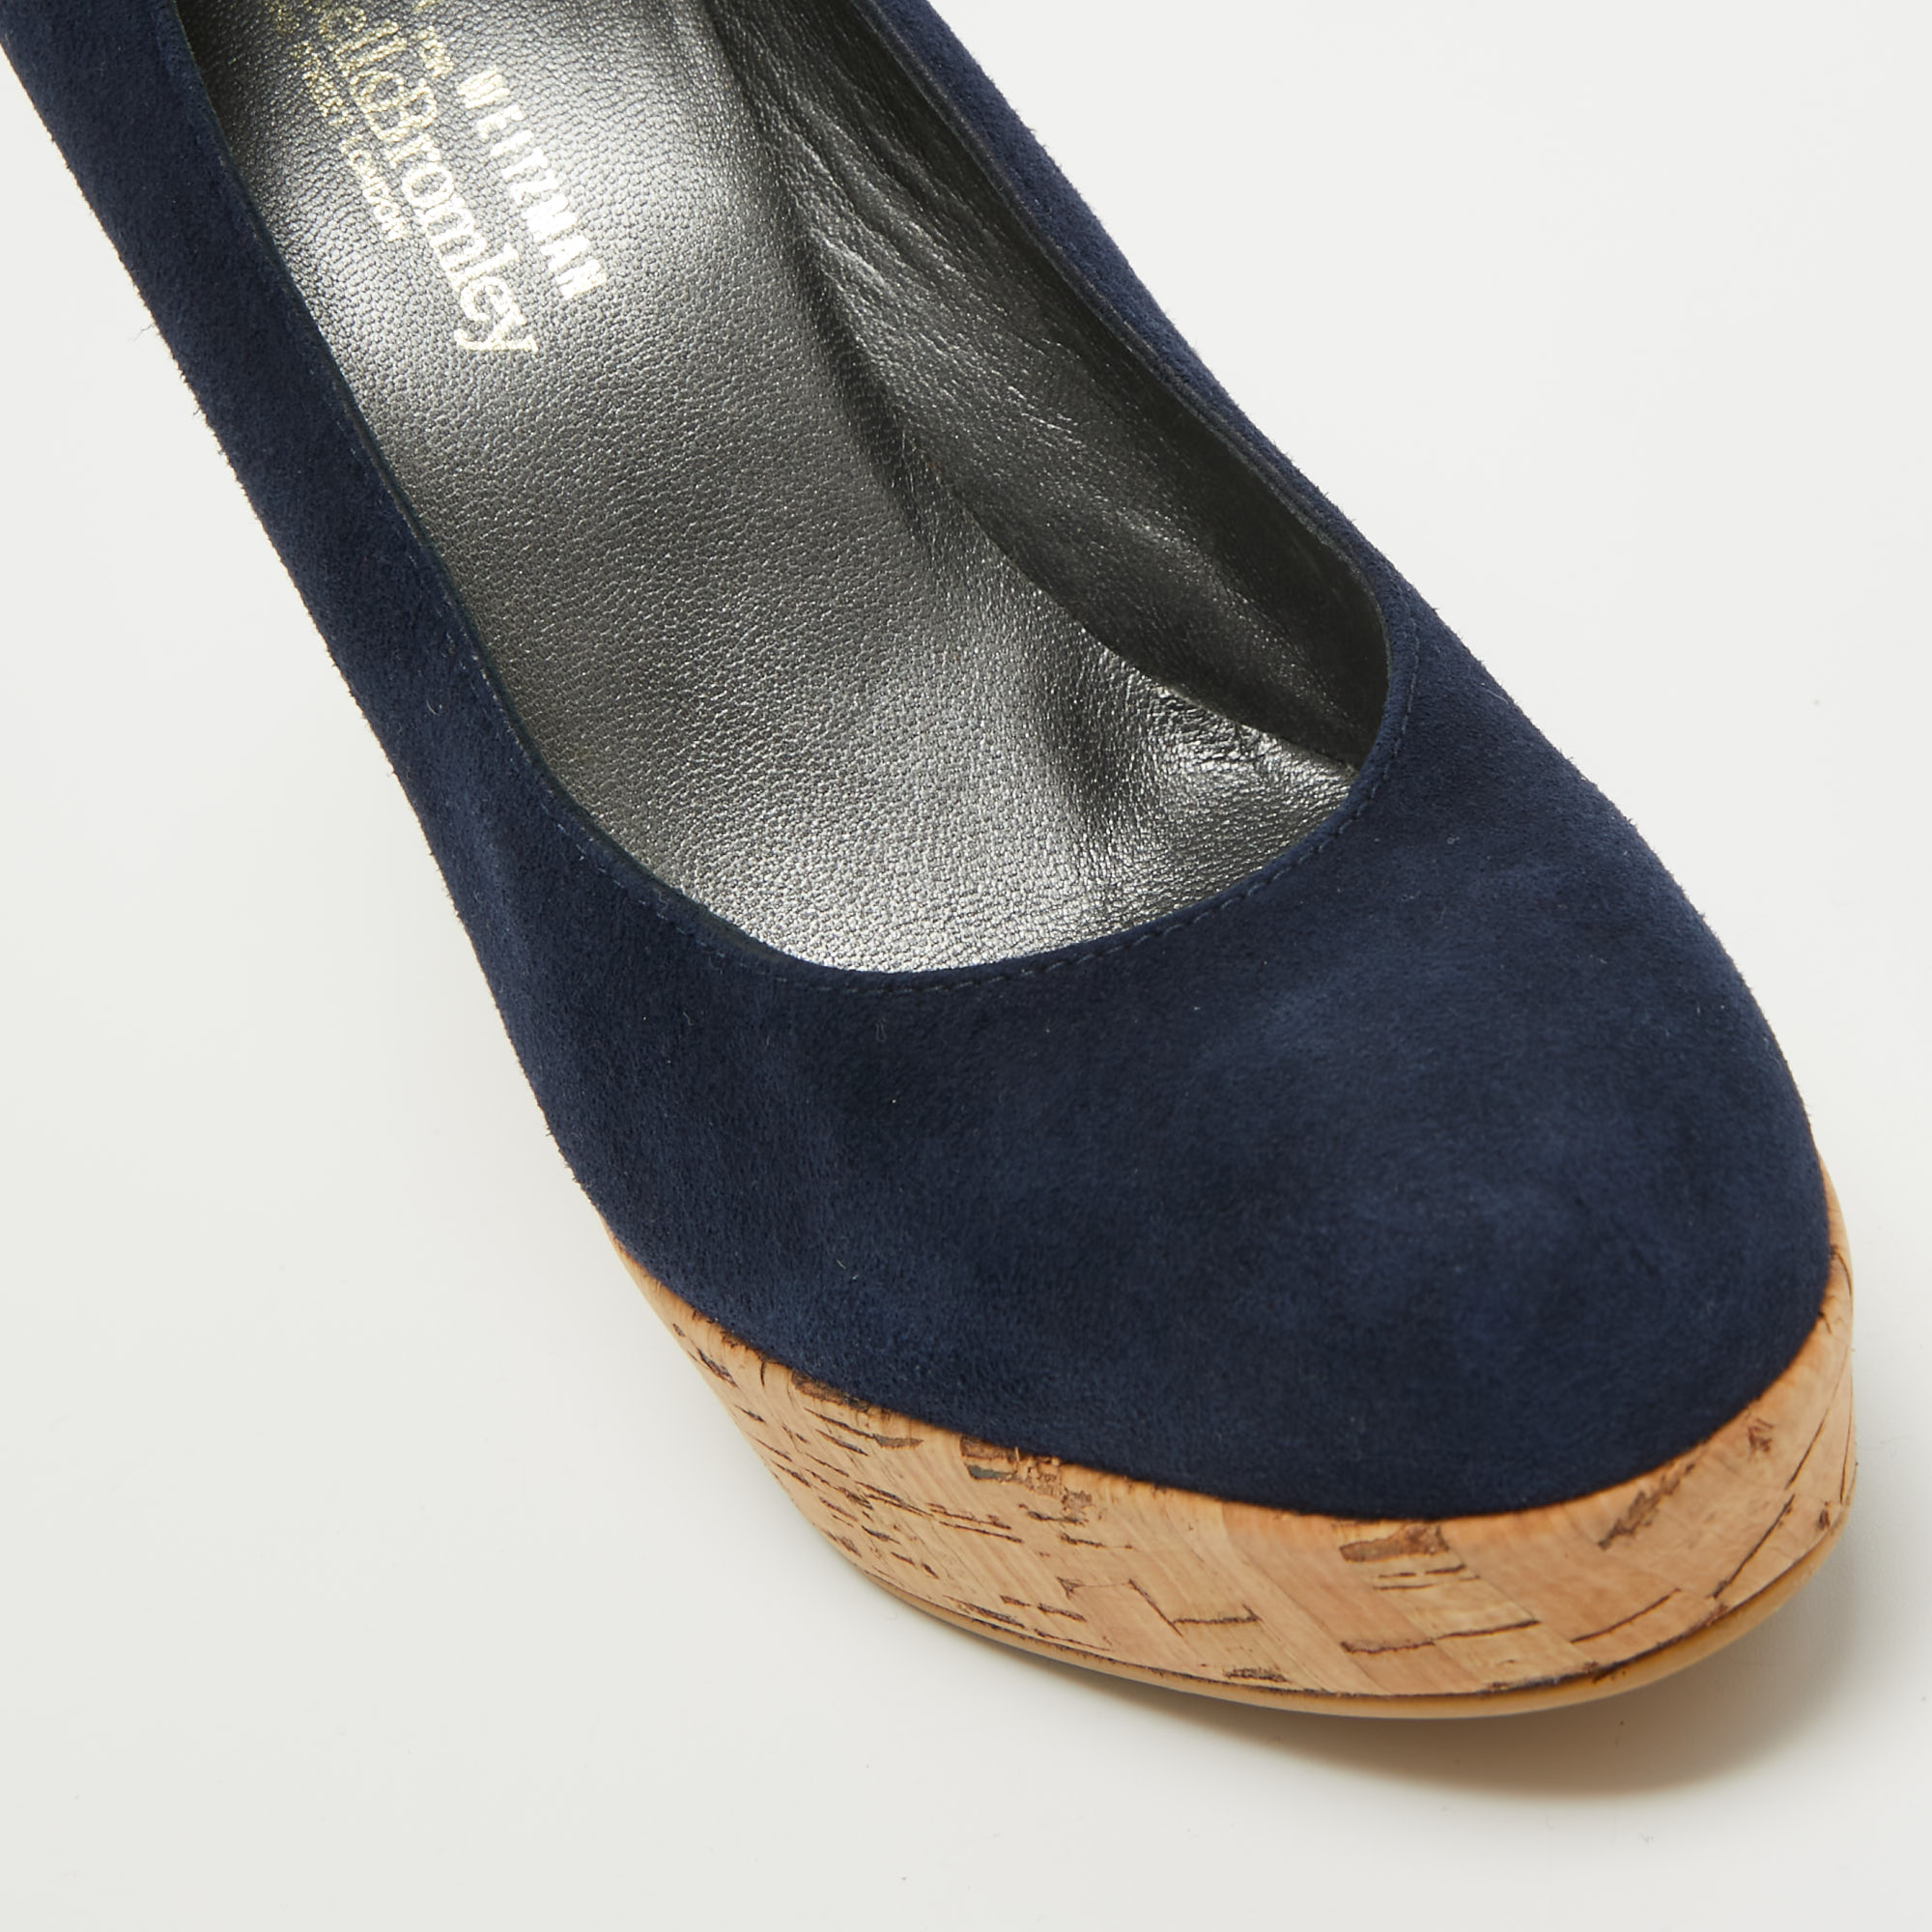 Stuart Weitzman X Russell Bromley Navy Blue Suede Corkswoon Wedge Pumps Size 35.5